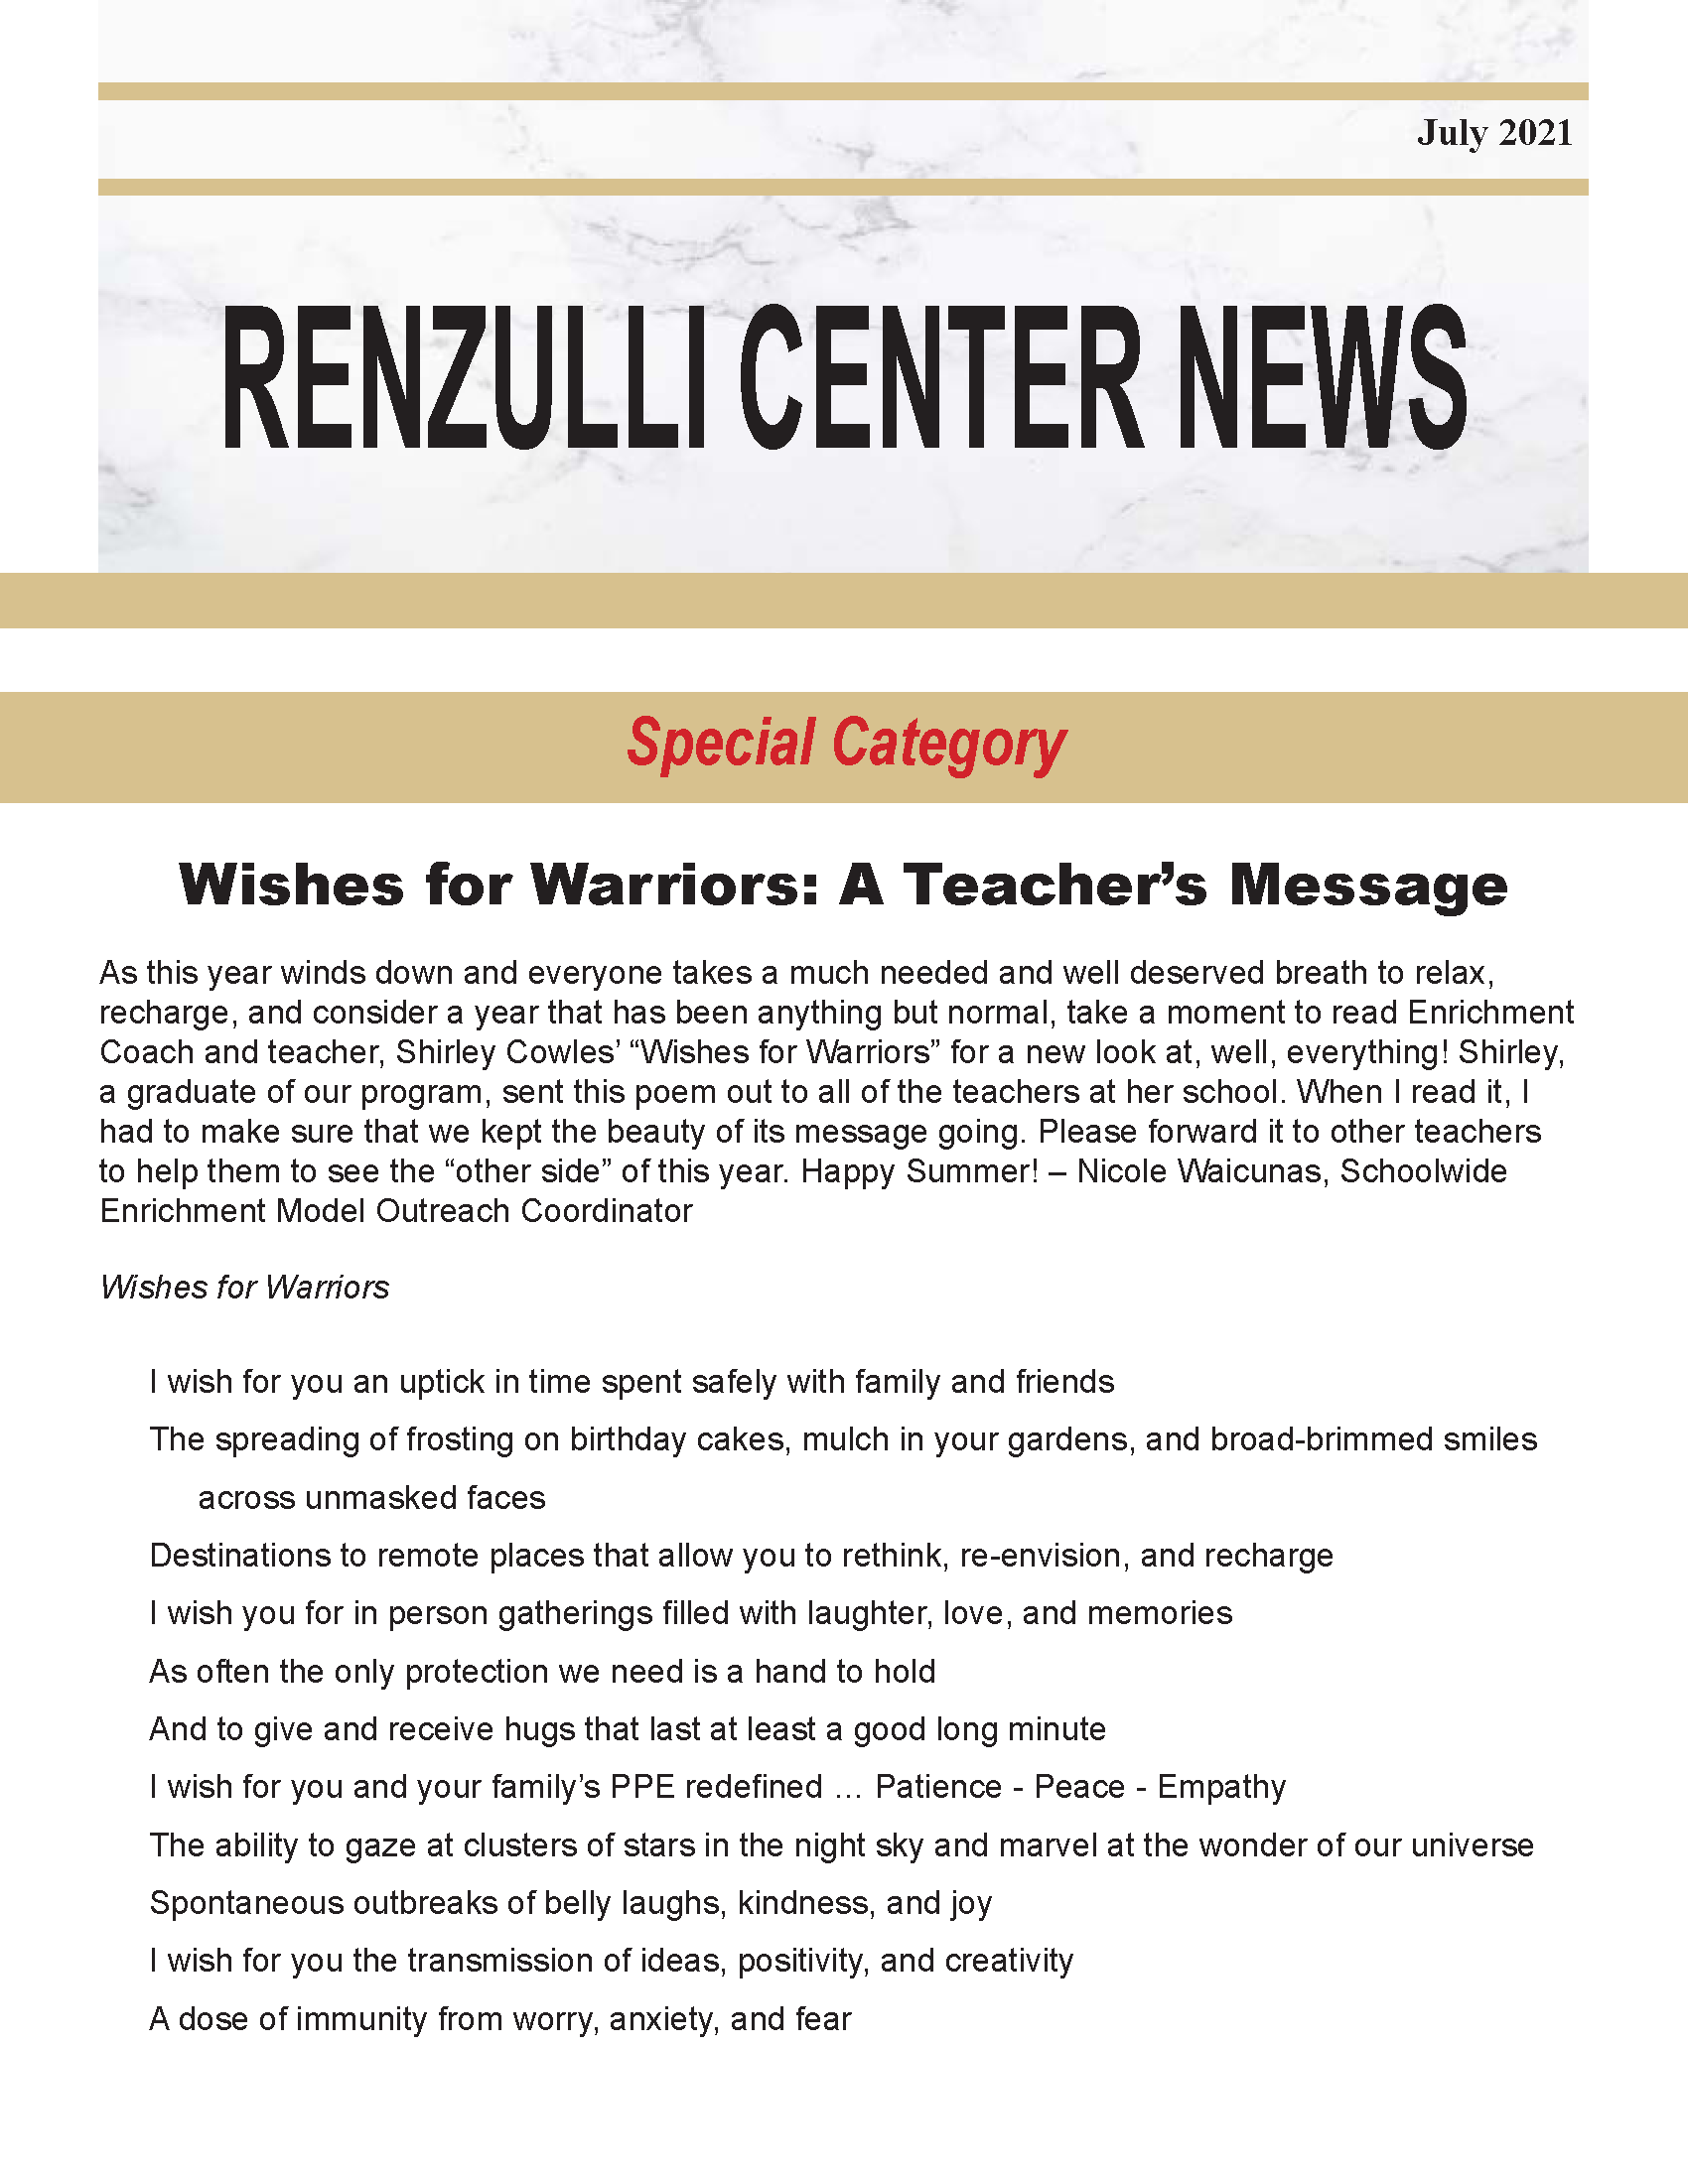 July 2021 Renzulli News Cover Graphic